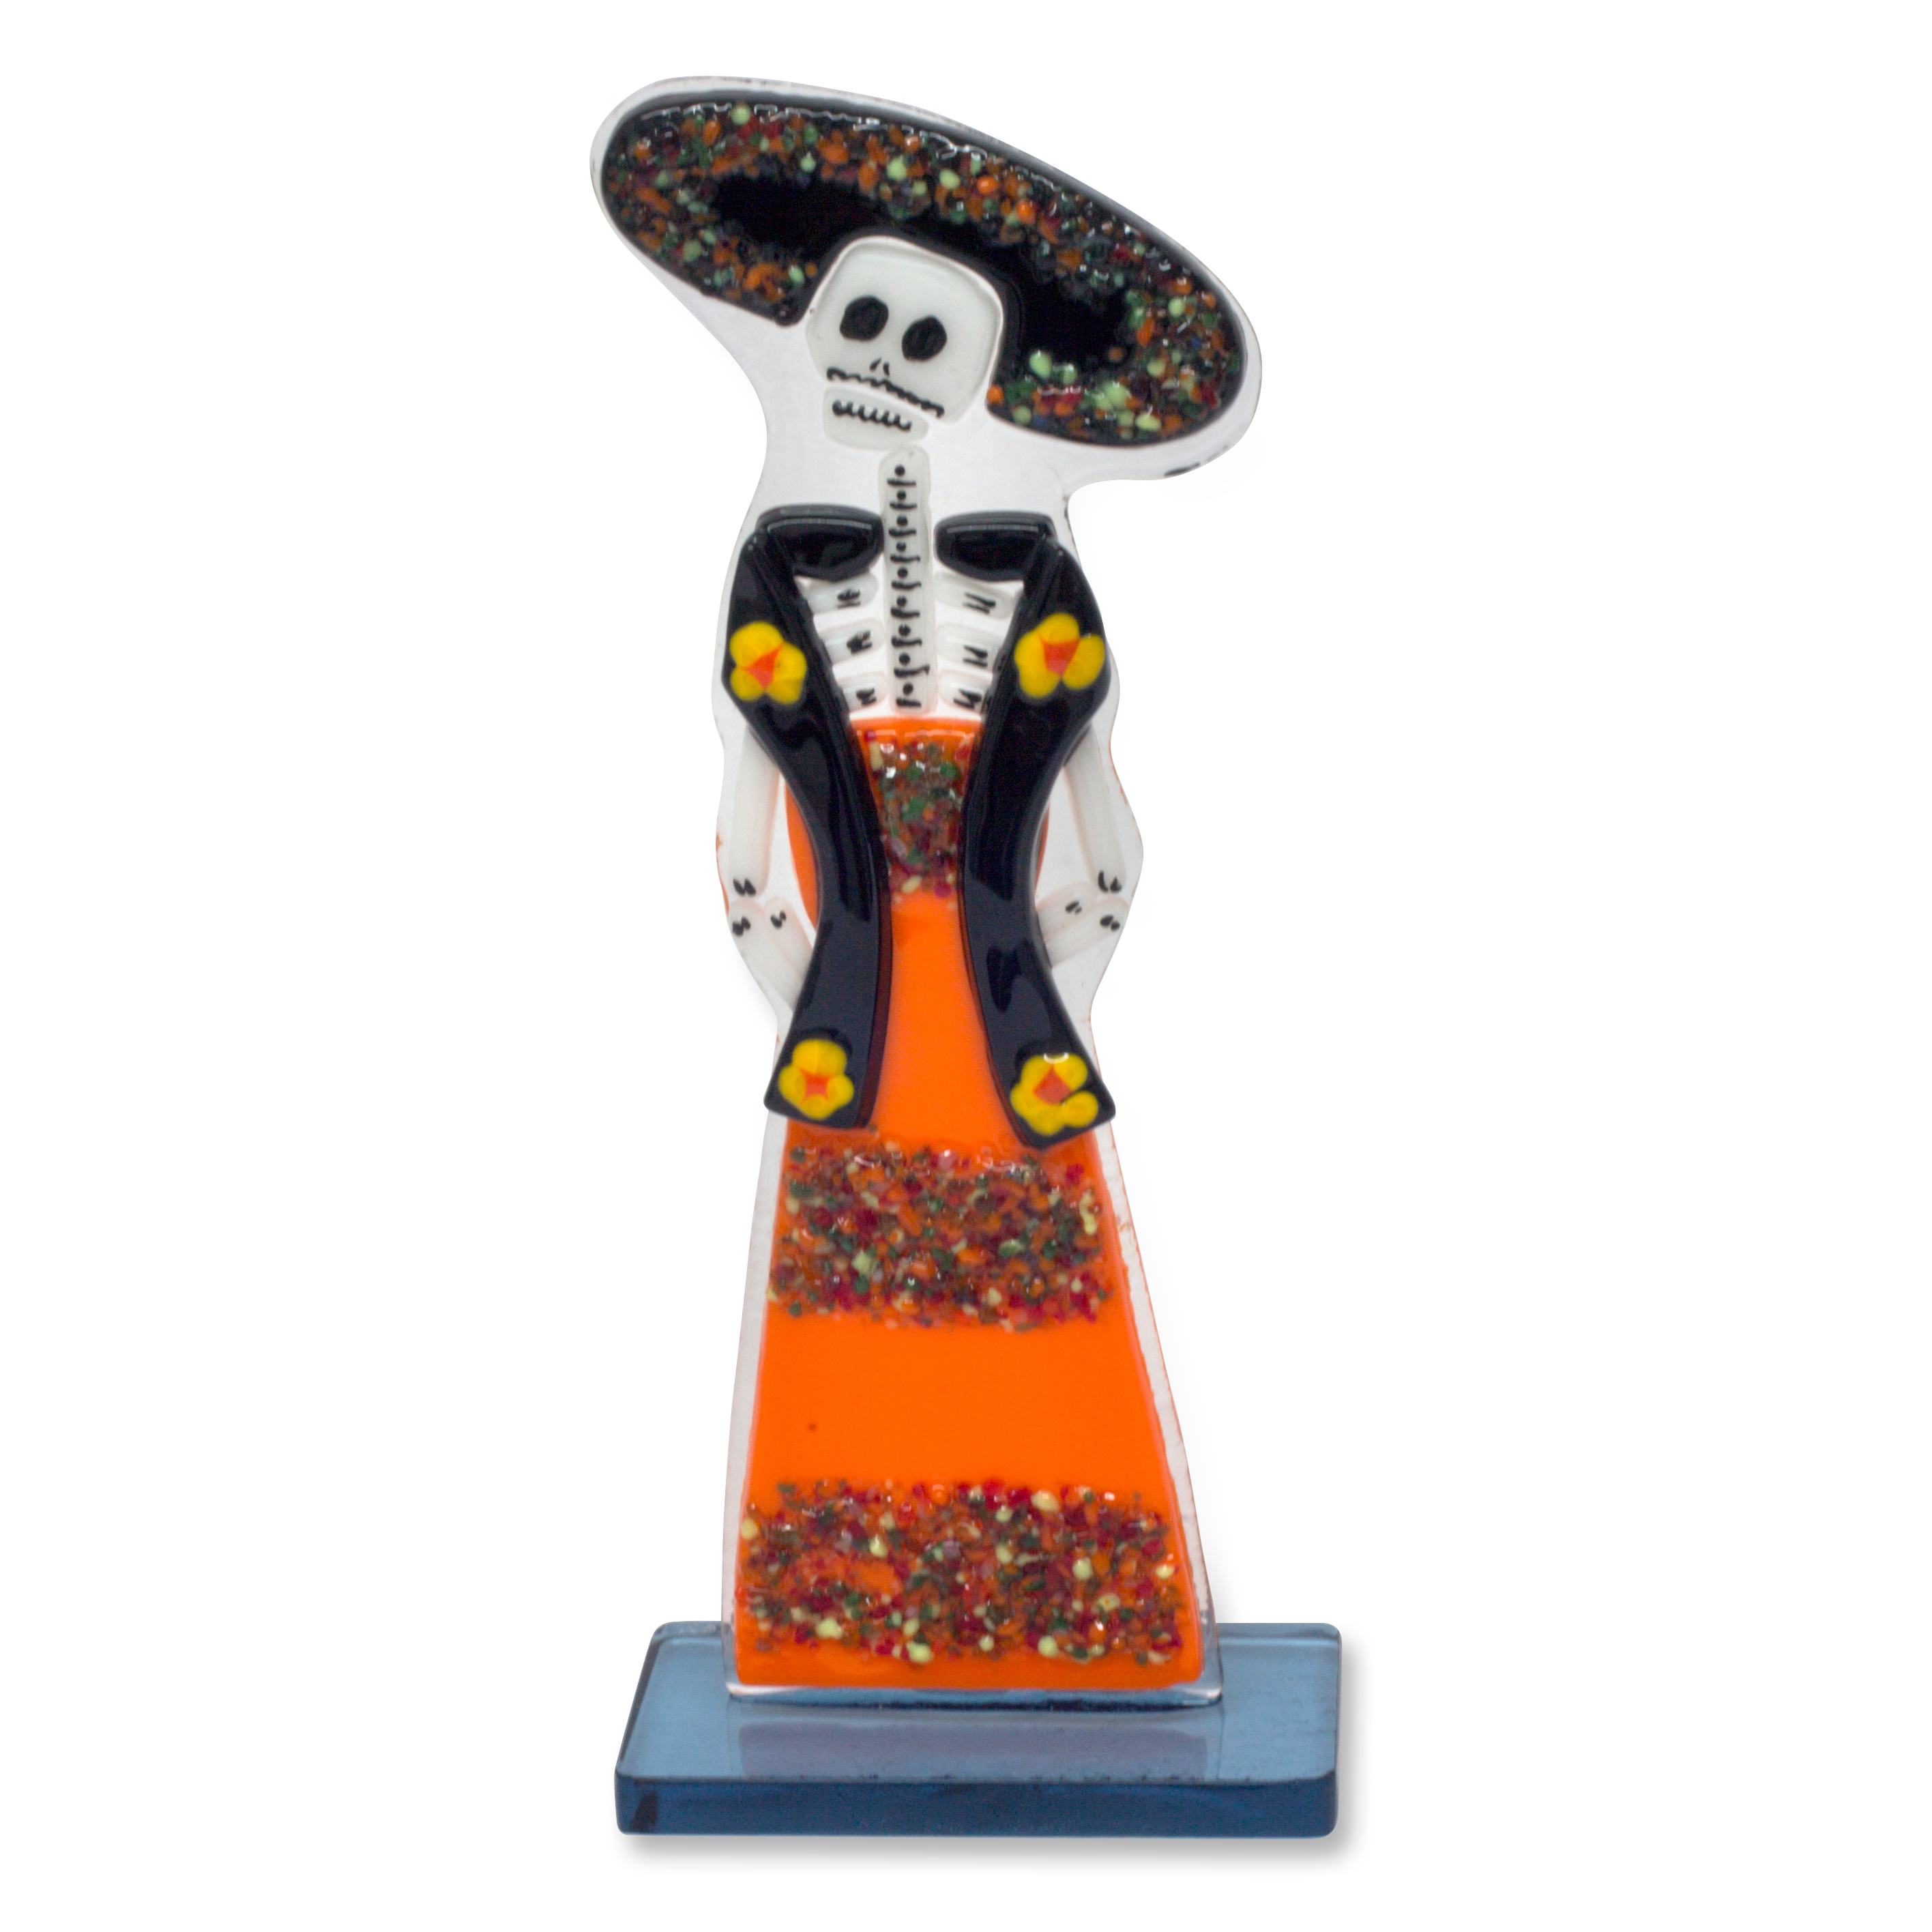 Unicef Uk Market Day Of The Dead Art Glass Figurine Sculpture From